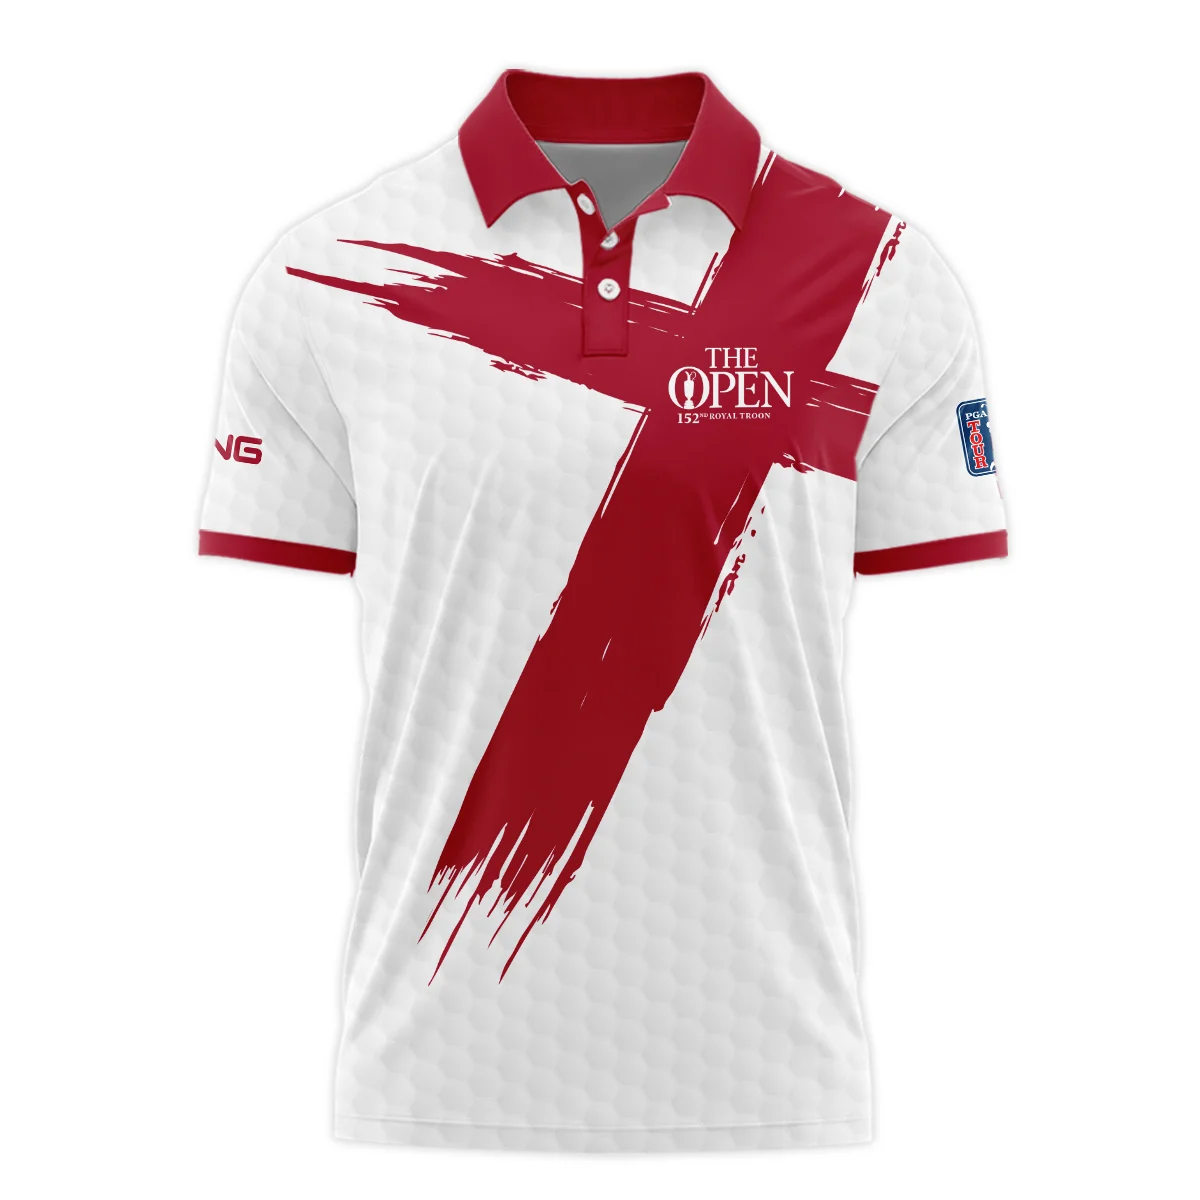 Ping 152nd The Open Championship Golf Sport Long Polo Shirt Red White Golf Pattern All Over Print Long Polo Shirt For Men